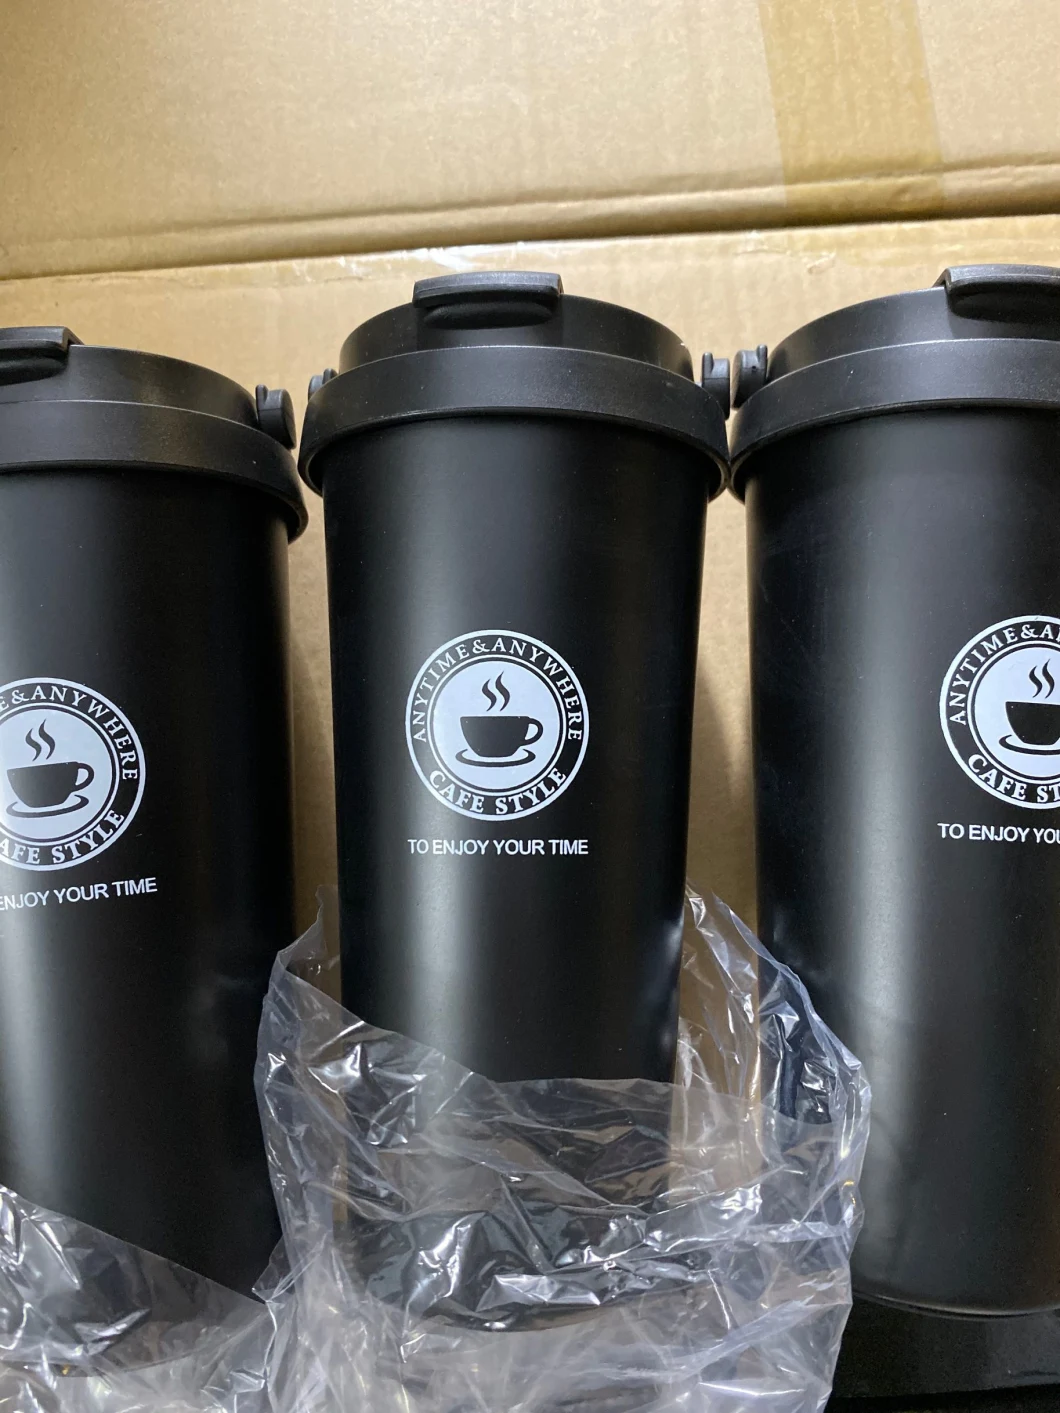 Stainless Steel Double Wall Driving Coffee Mug Eco-Friendly Water Bottle Vacuum Insulated Splash Proof Travel Thermos Cup 500ml 17oz Custom Logo